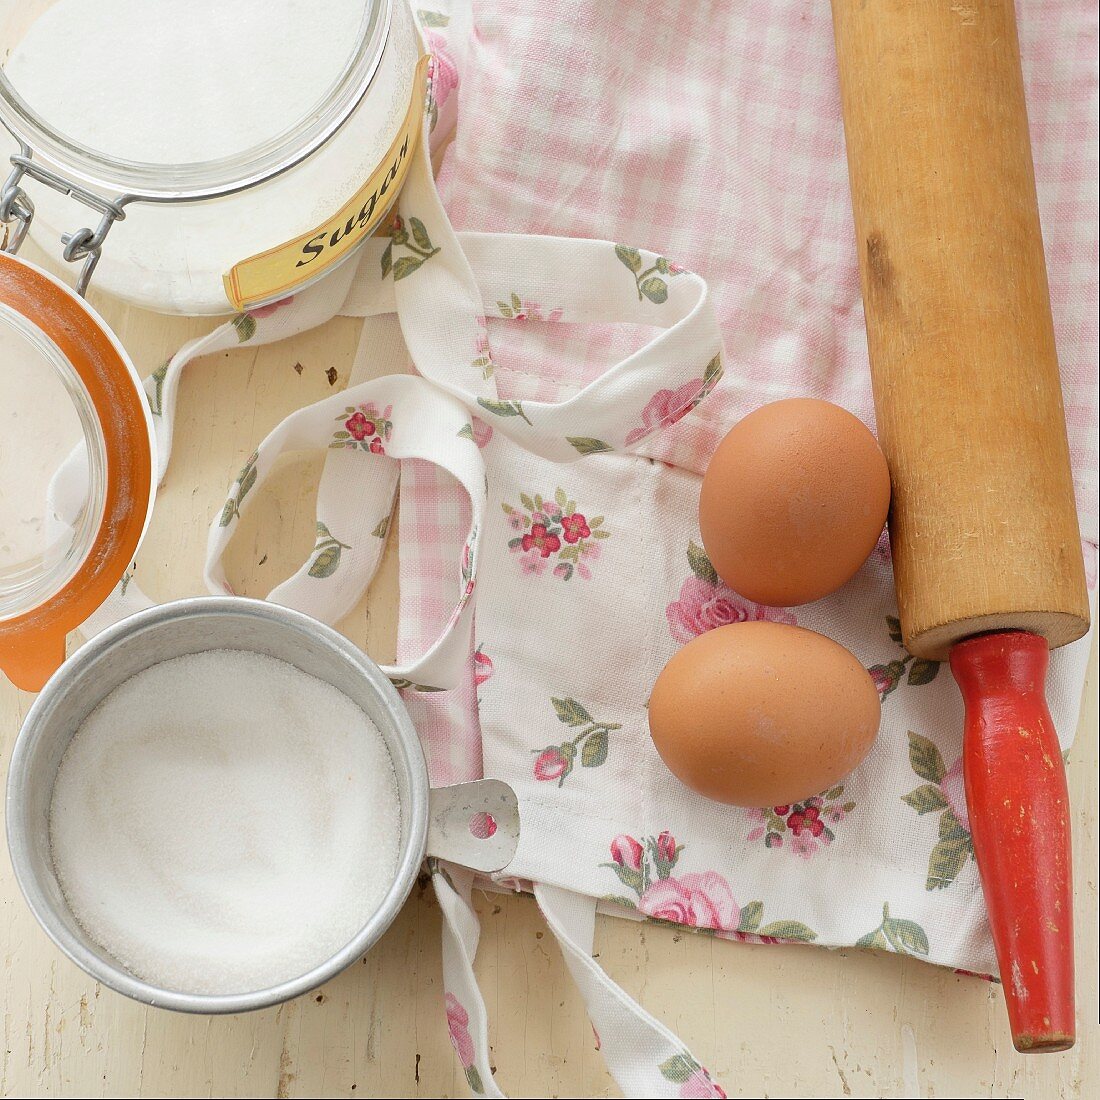 Baking ingredients and a rose-patterned apron